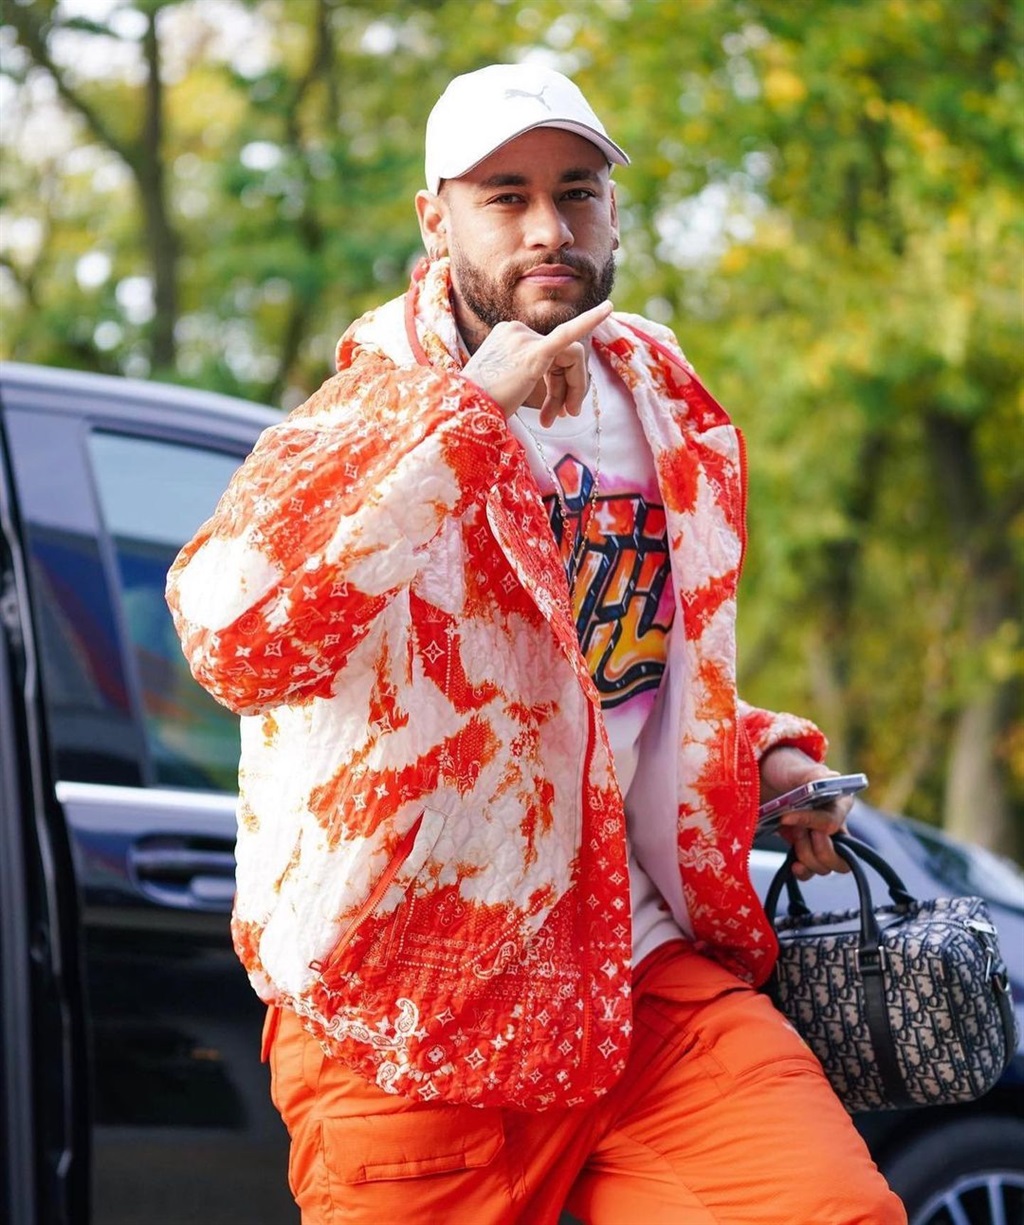 Neymar stepping out in a vibrant orange-filled out